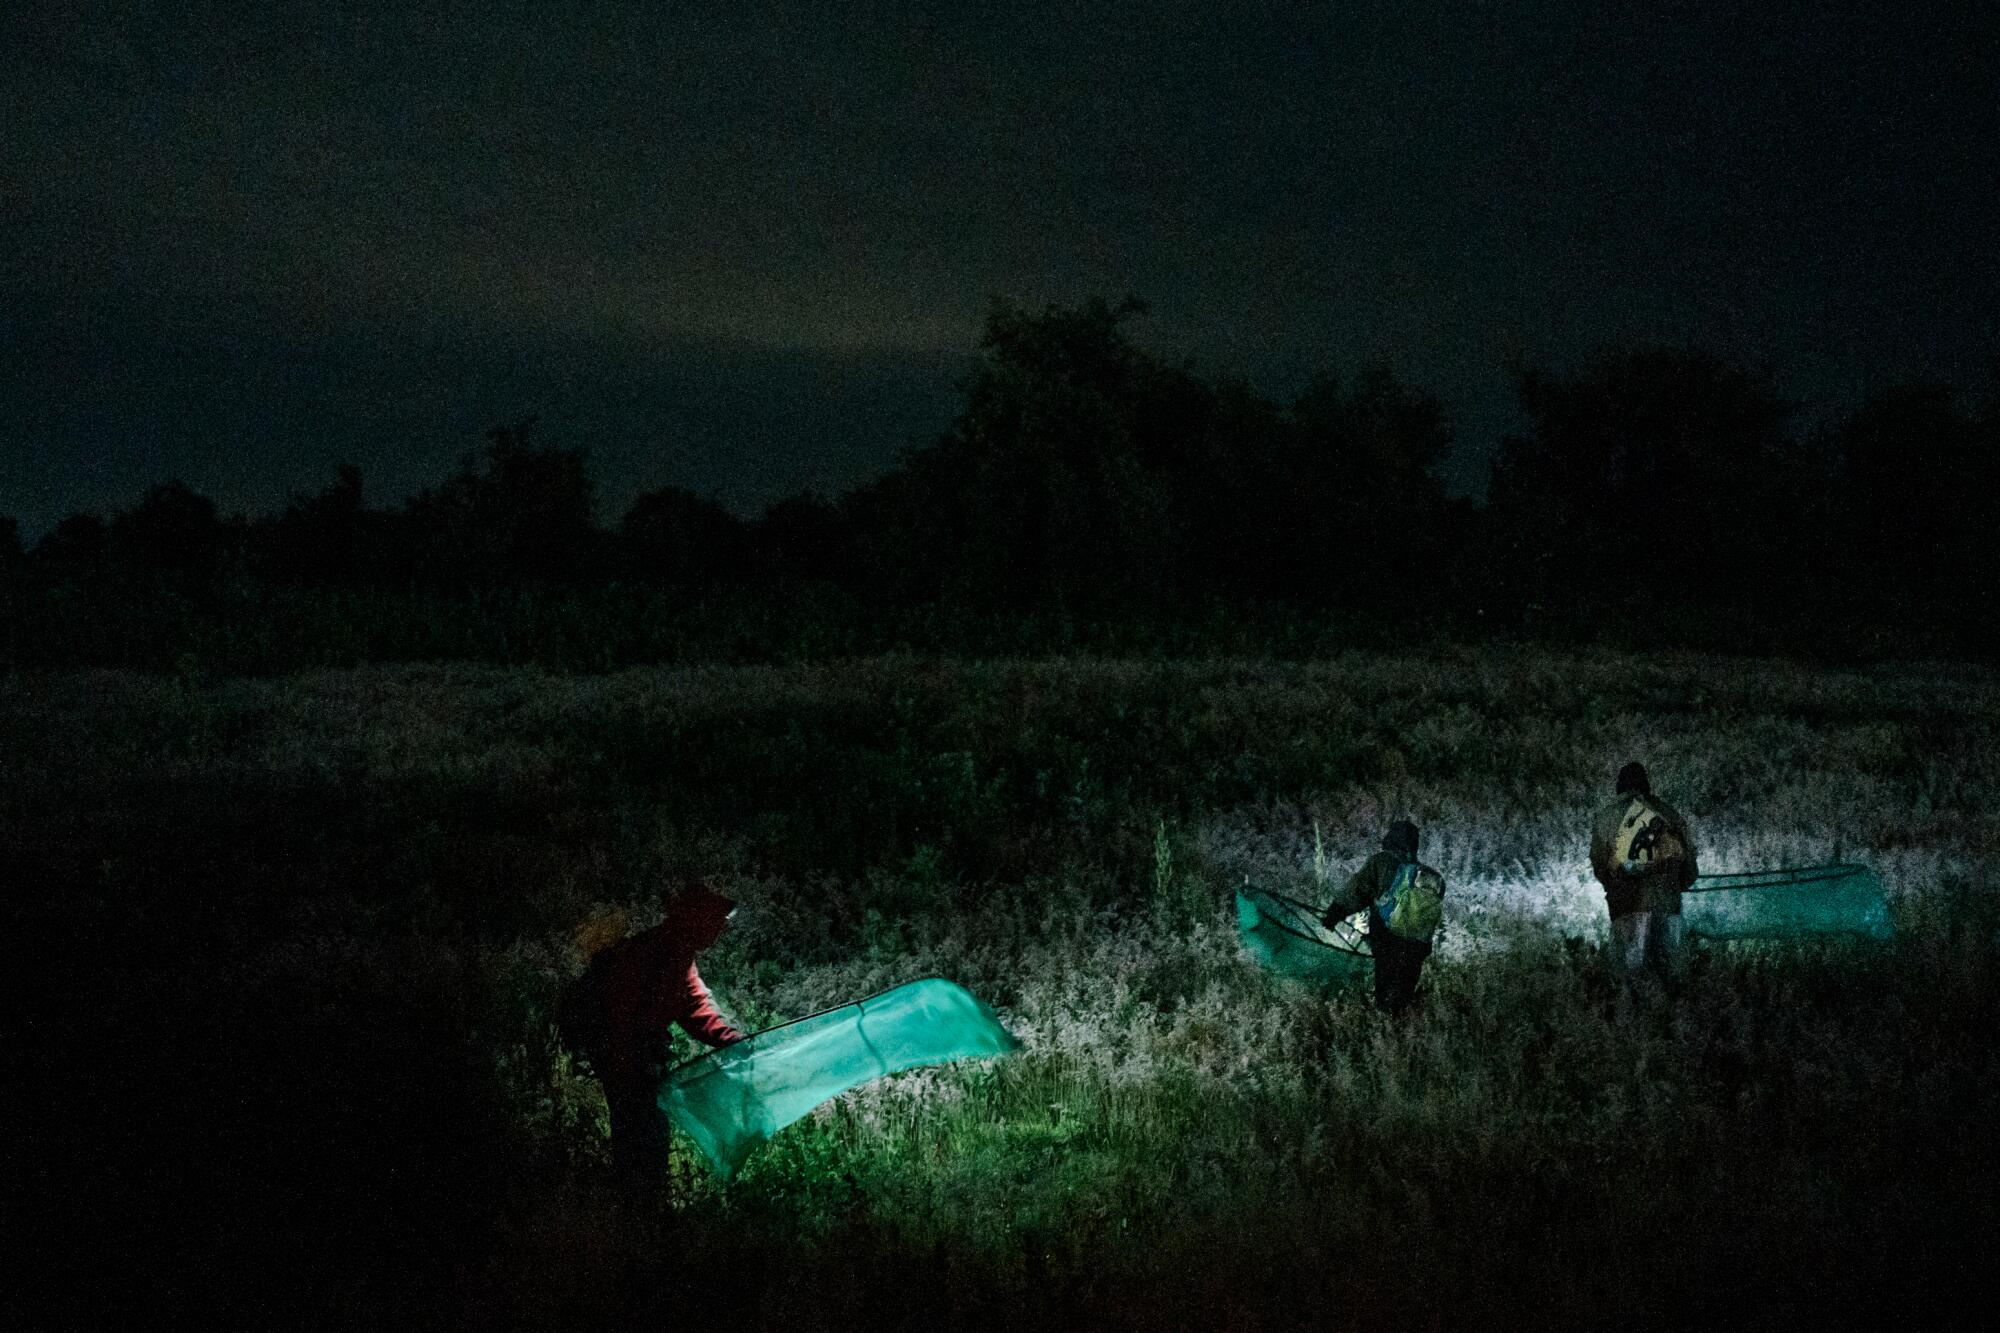 People hunt for grasshoppers in a dark field